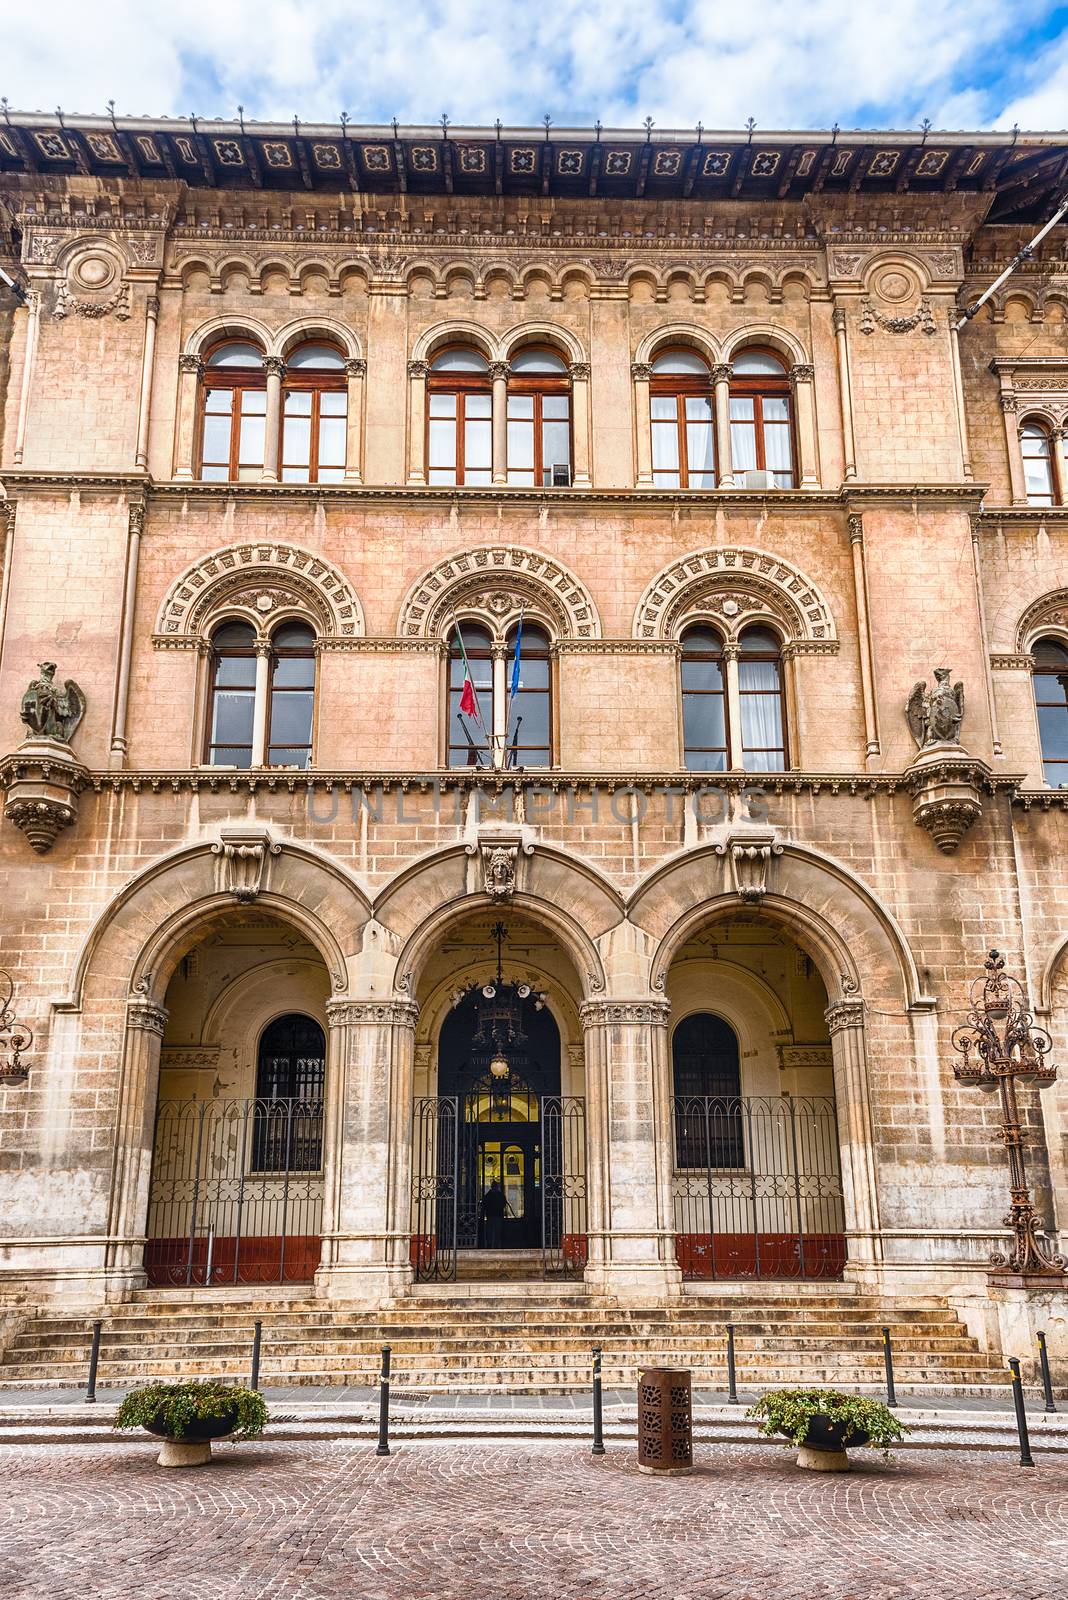 Facade of the Civil Court of Perugia, Italy by marcorubino